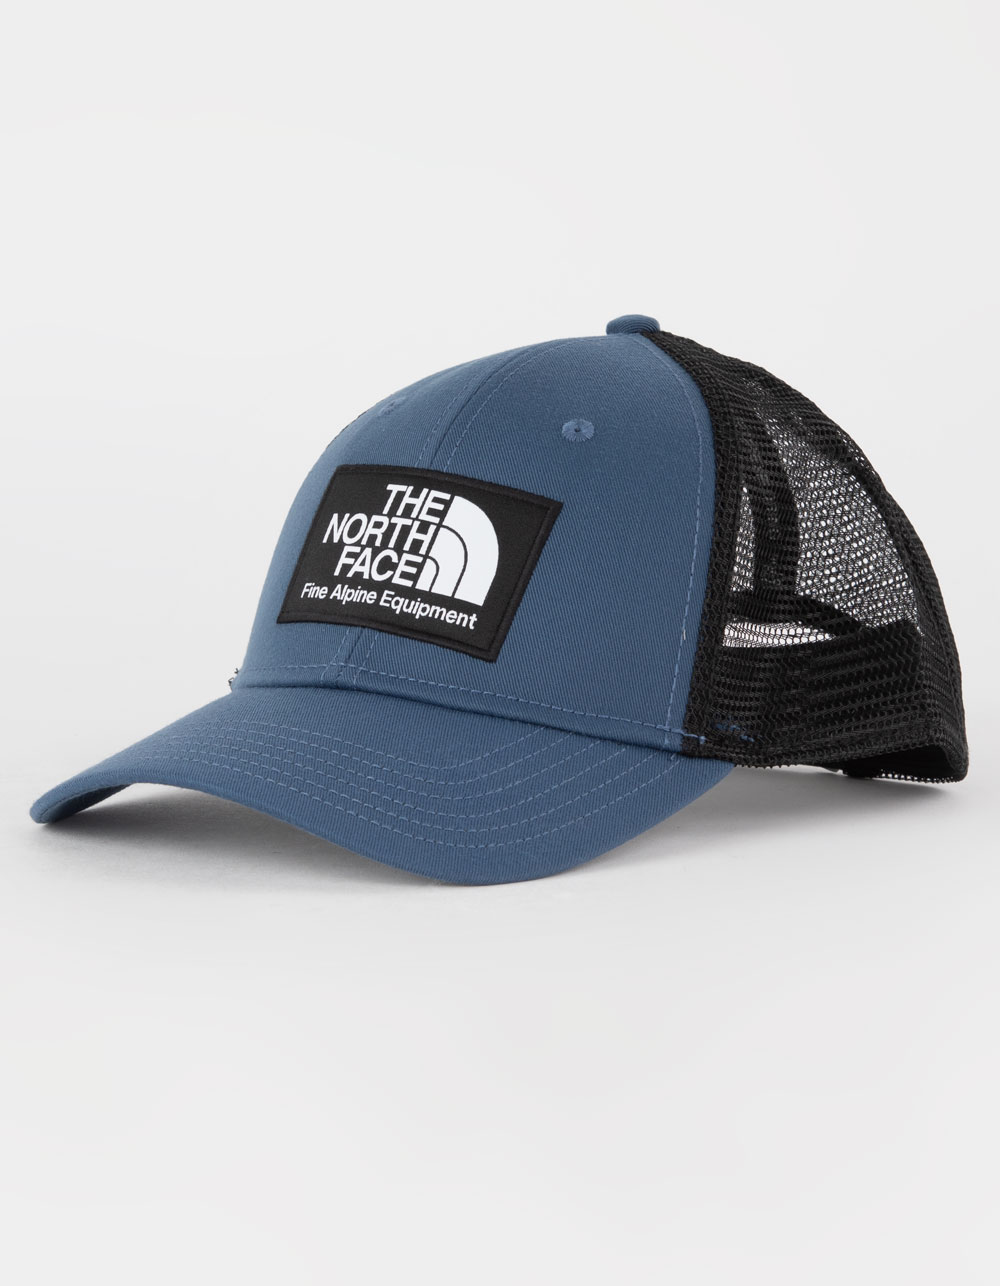 The North Face Mudder Trucker Hat (Shady Blue)